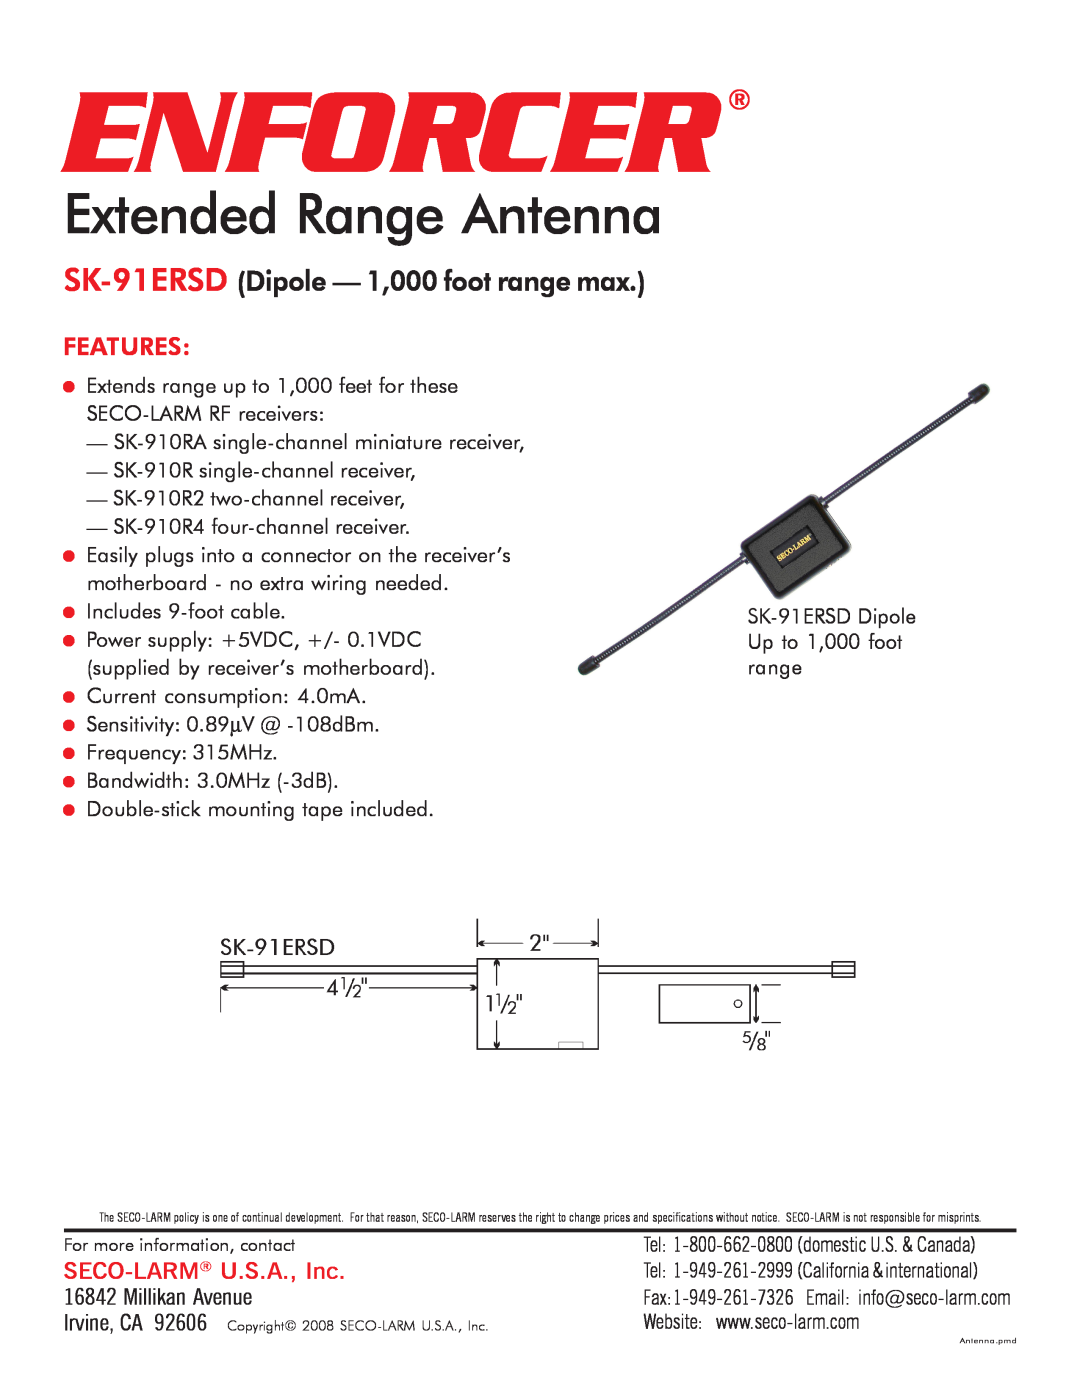 SECO-LARM USA specifications Enforcer, Extended Range Antenna, SK-91ERSD Dipole - 1,000 foot range max, Features 